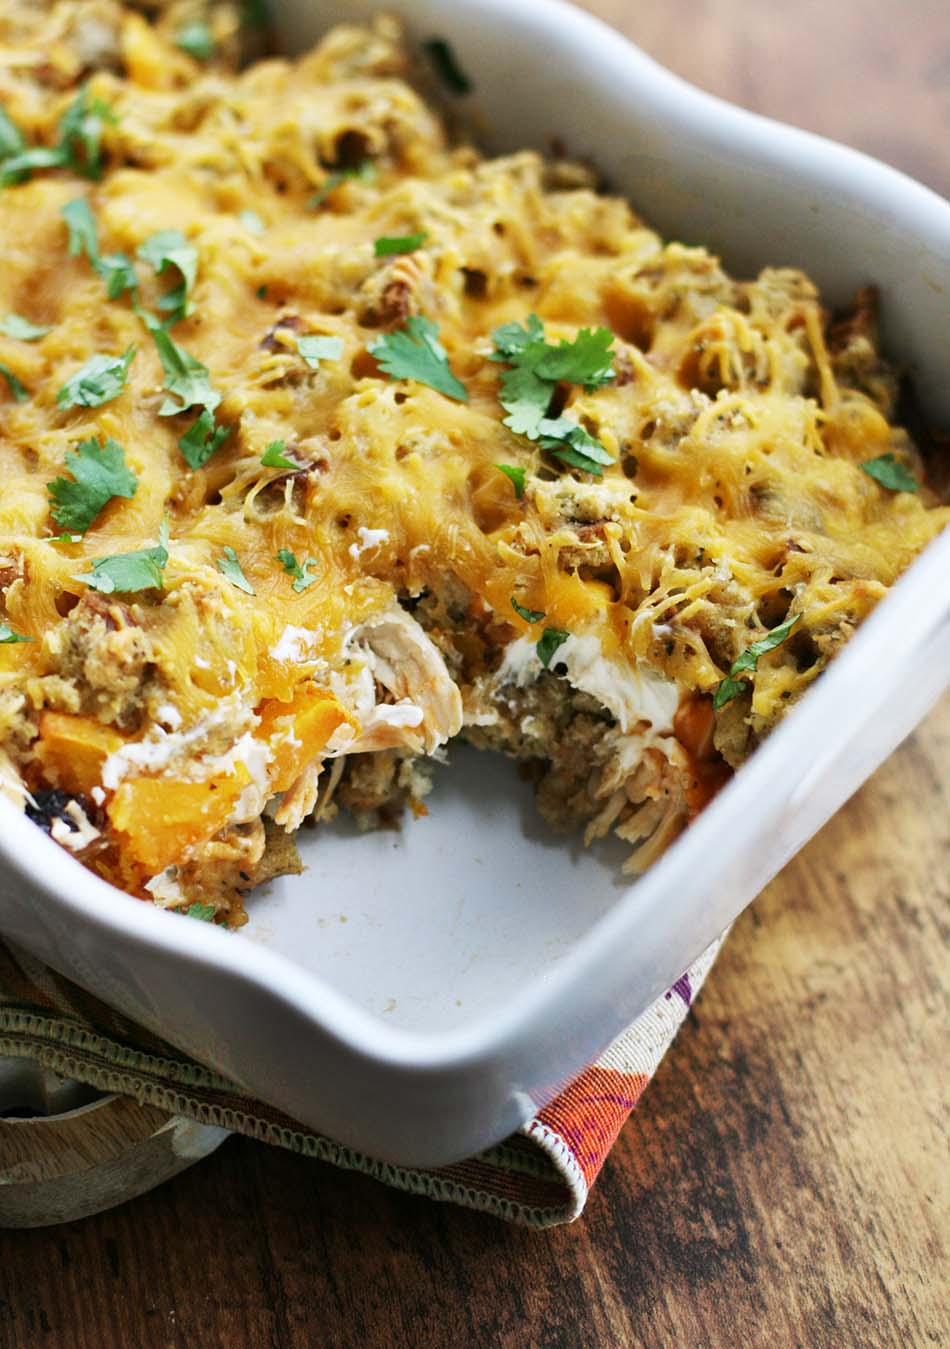 Thanksgiving leftover hotdish: Repurpose your leftovers into something amazing! Click through for recipe.